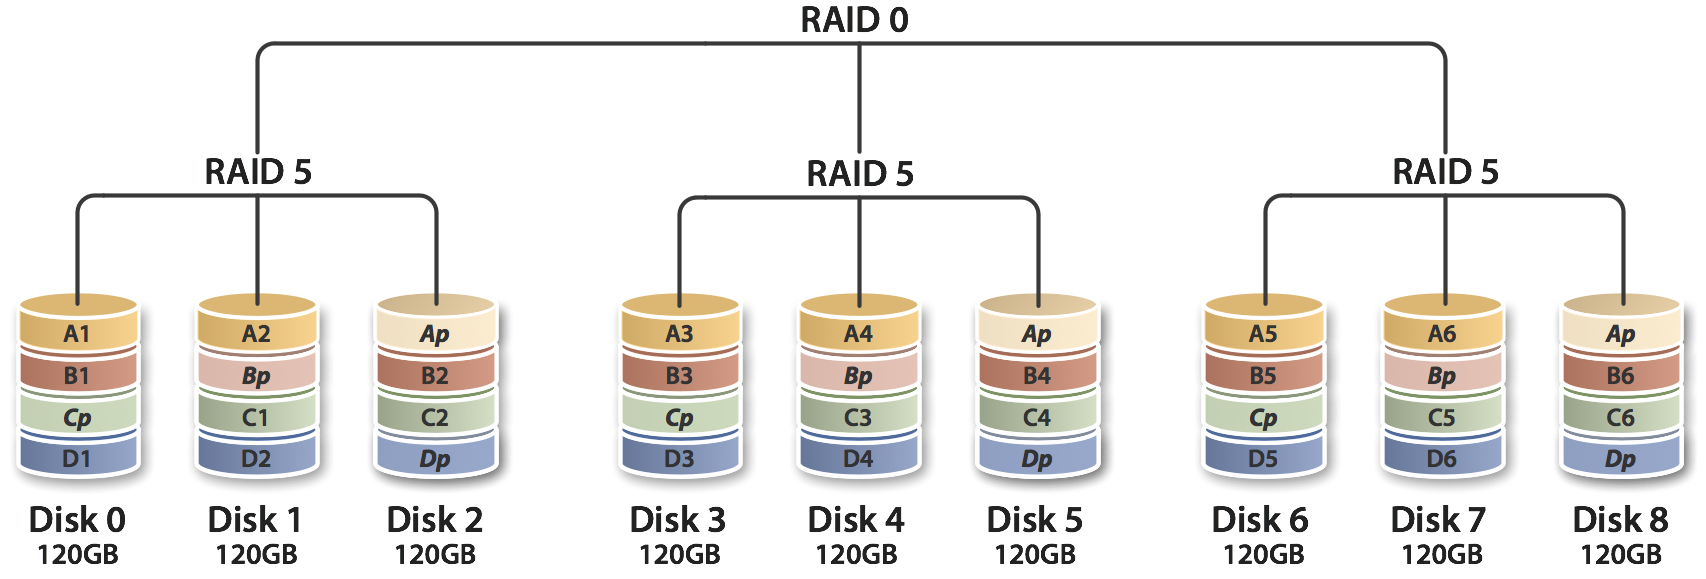 Server RAID Levels Guide: Pros, Cons, and Usages